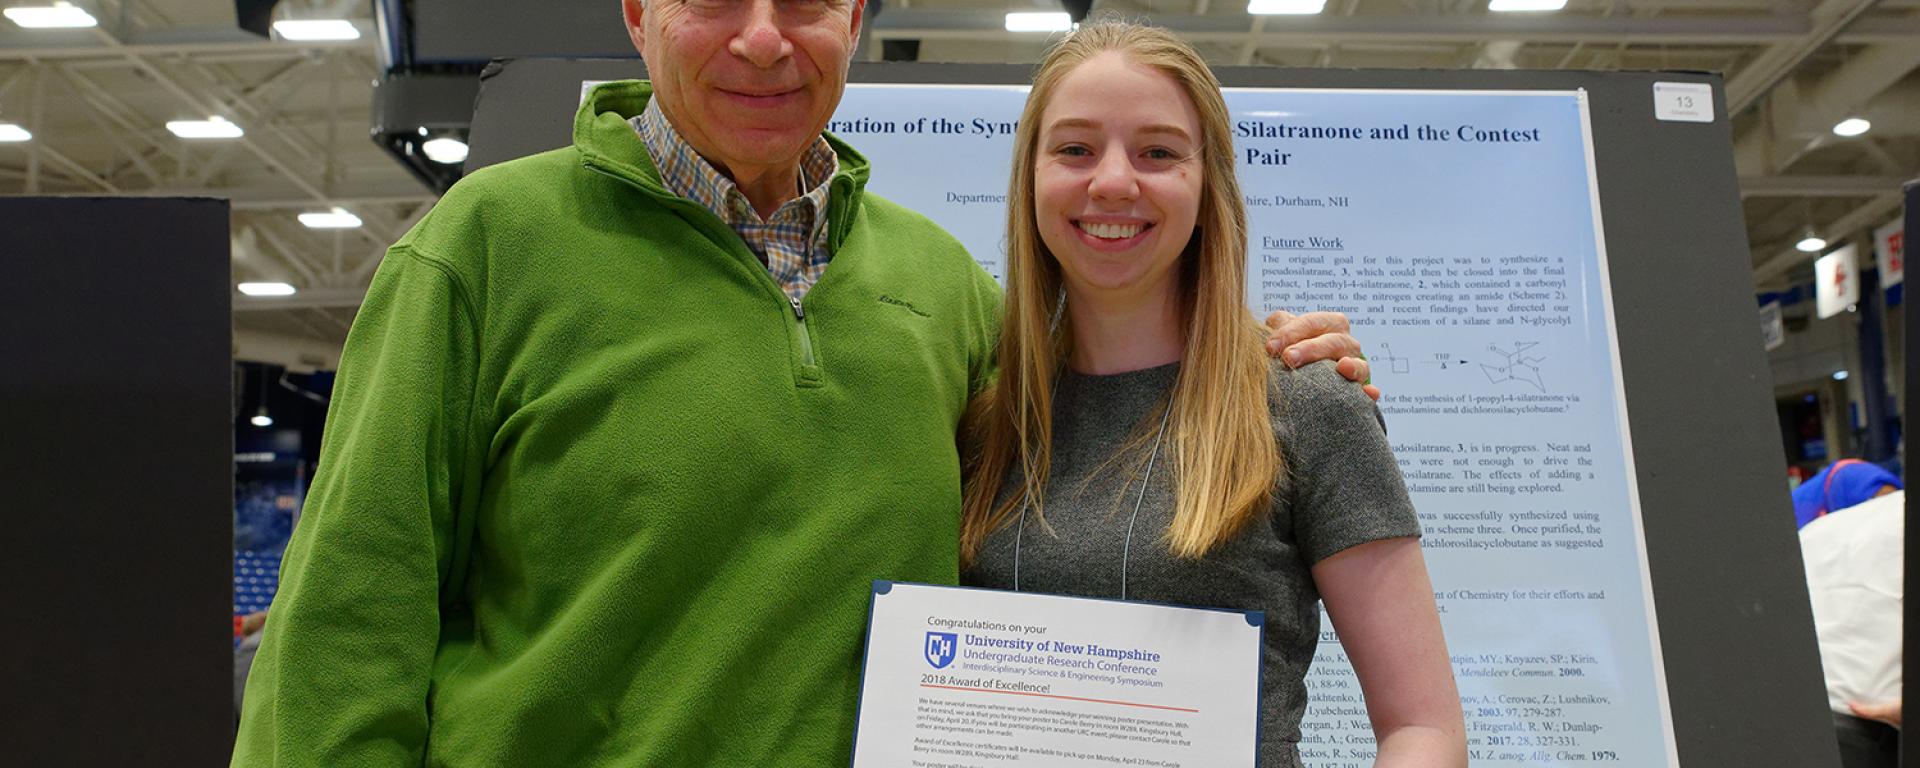 Kassie Picard with Prof. Art Greenberg at the 2018 URC